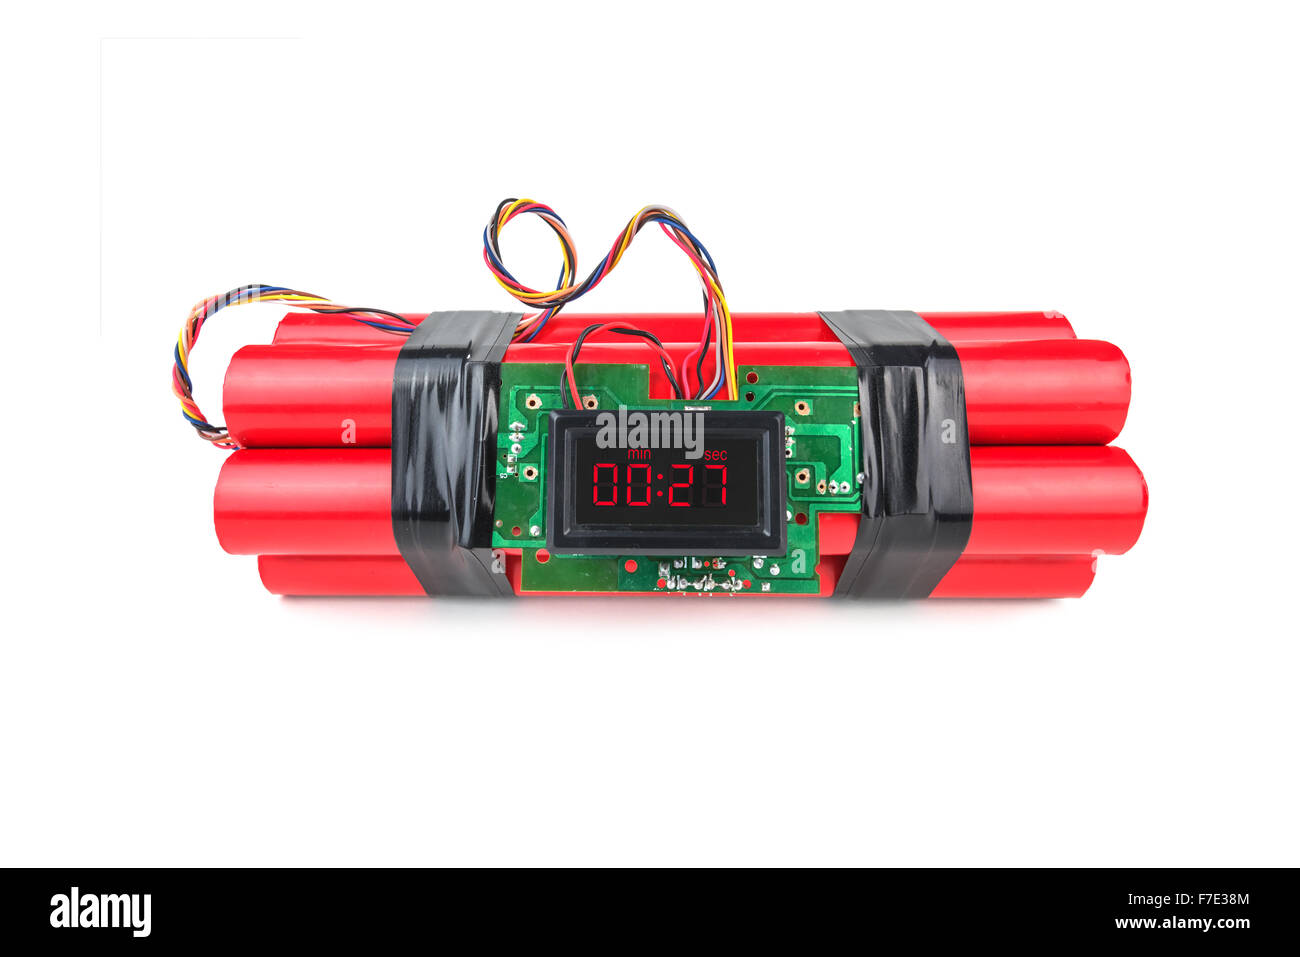 bomb with digital timer isolated Stock Photo